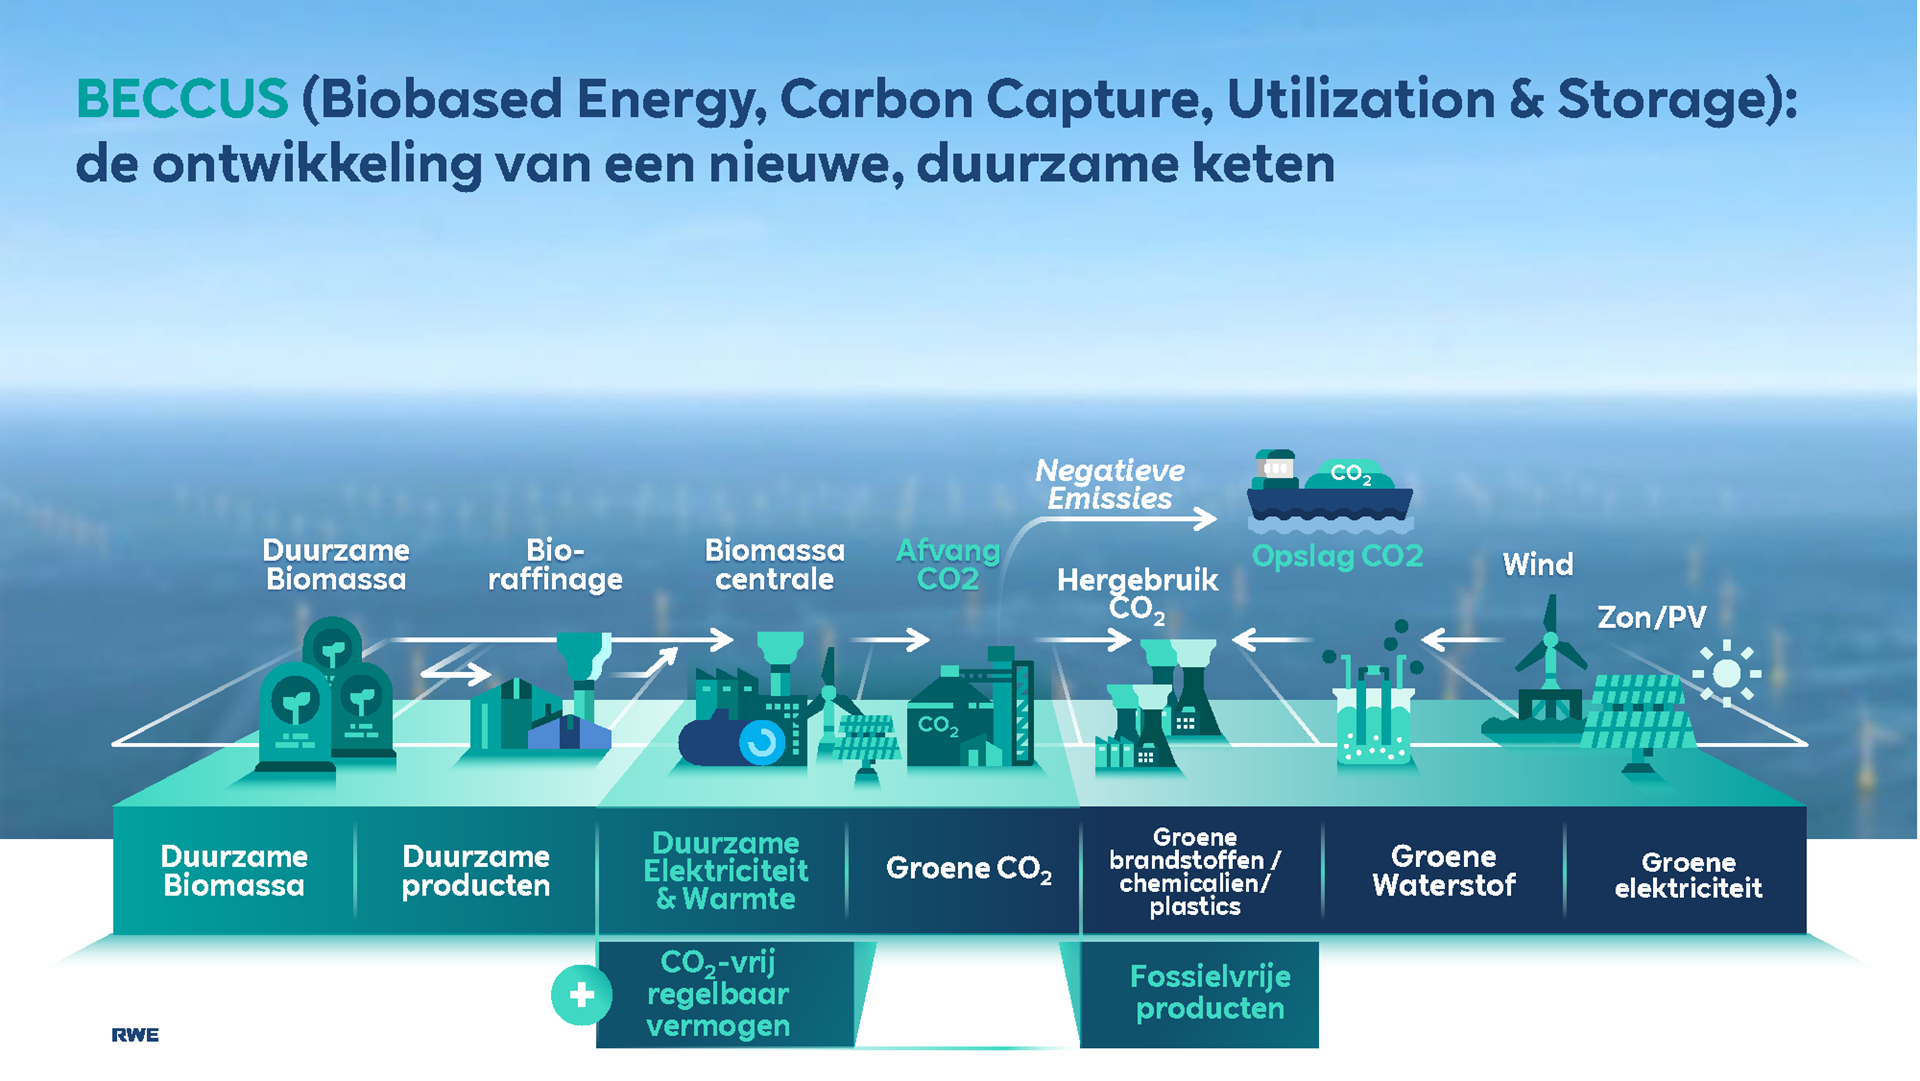 RWE launches project for large-scale capture and storage of CO₂